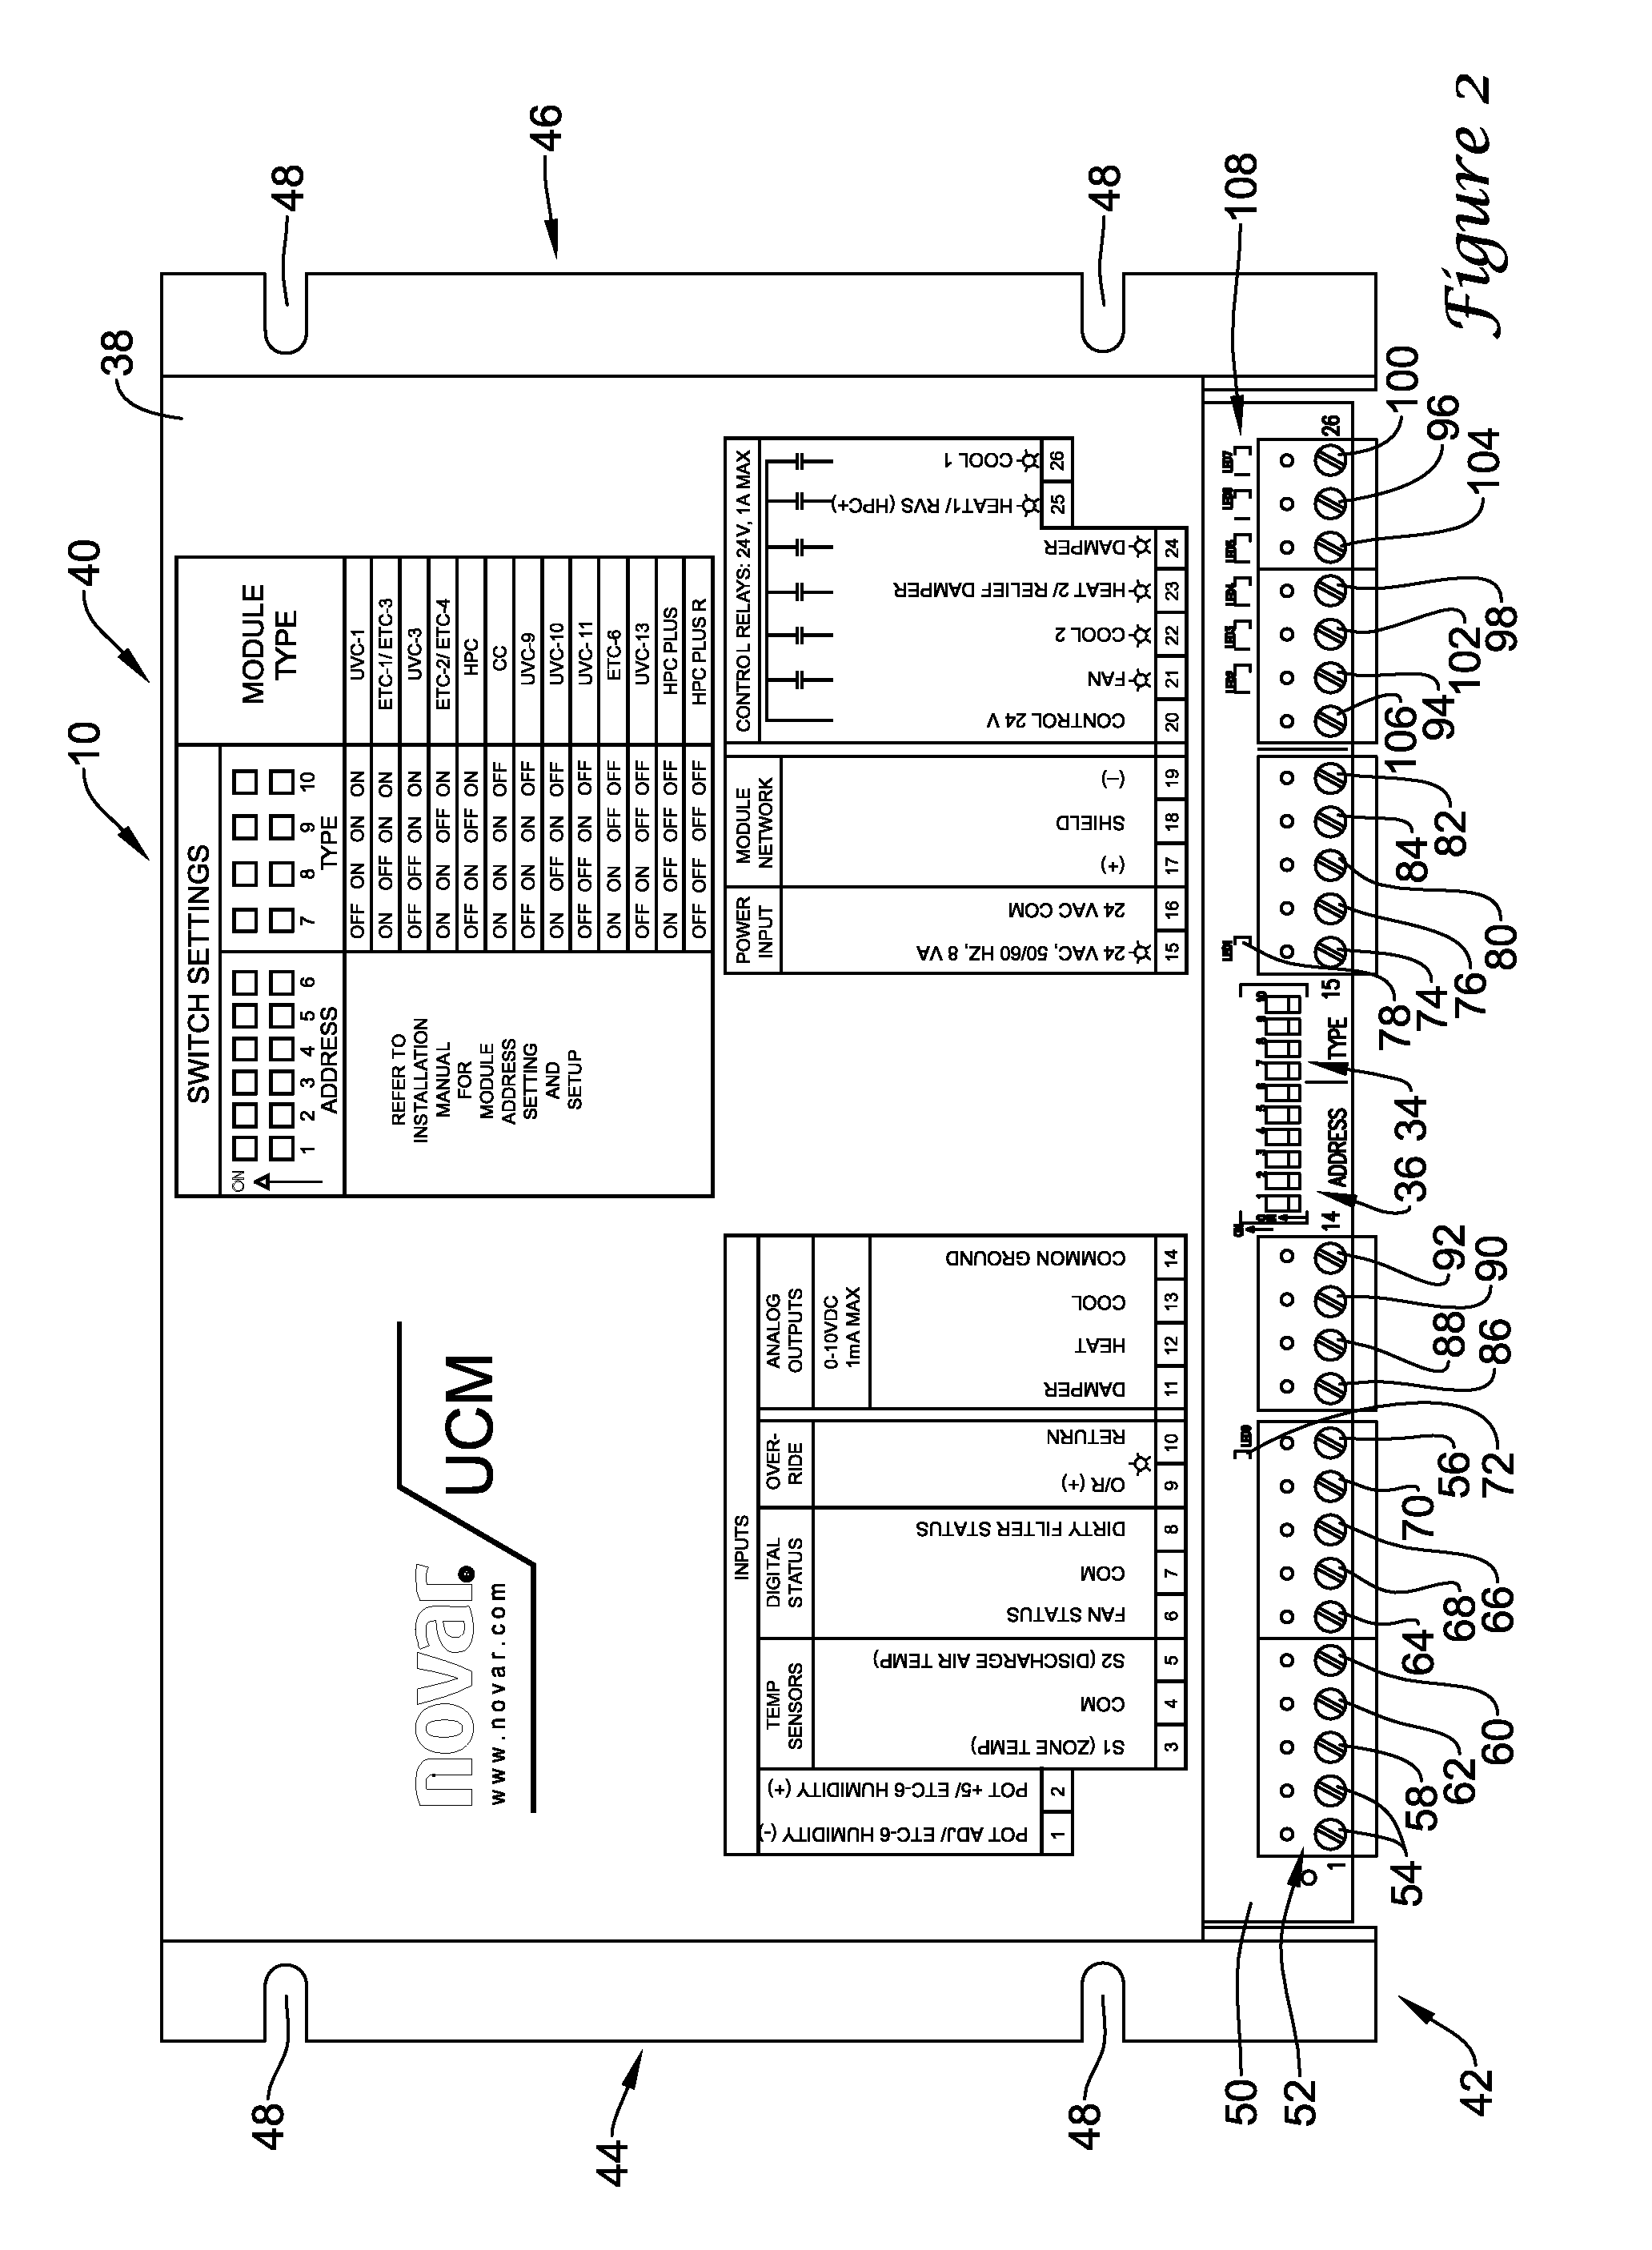 Unitary control module with adjustable input/output mapping